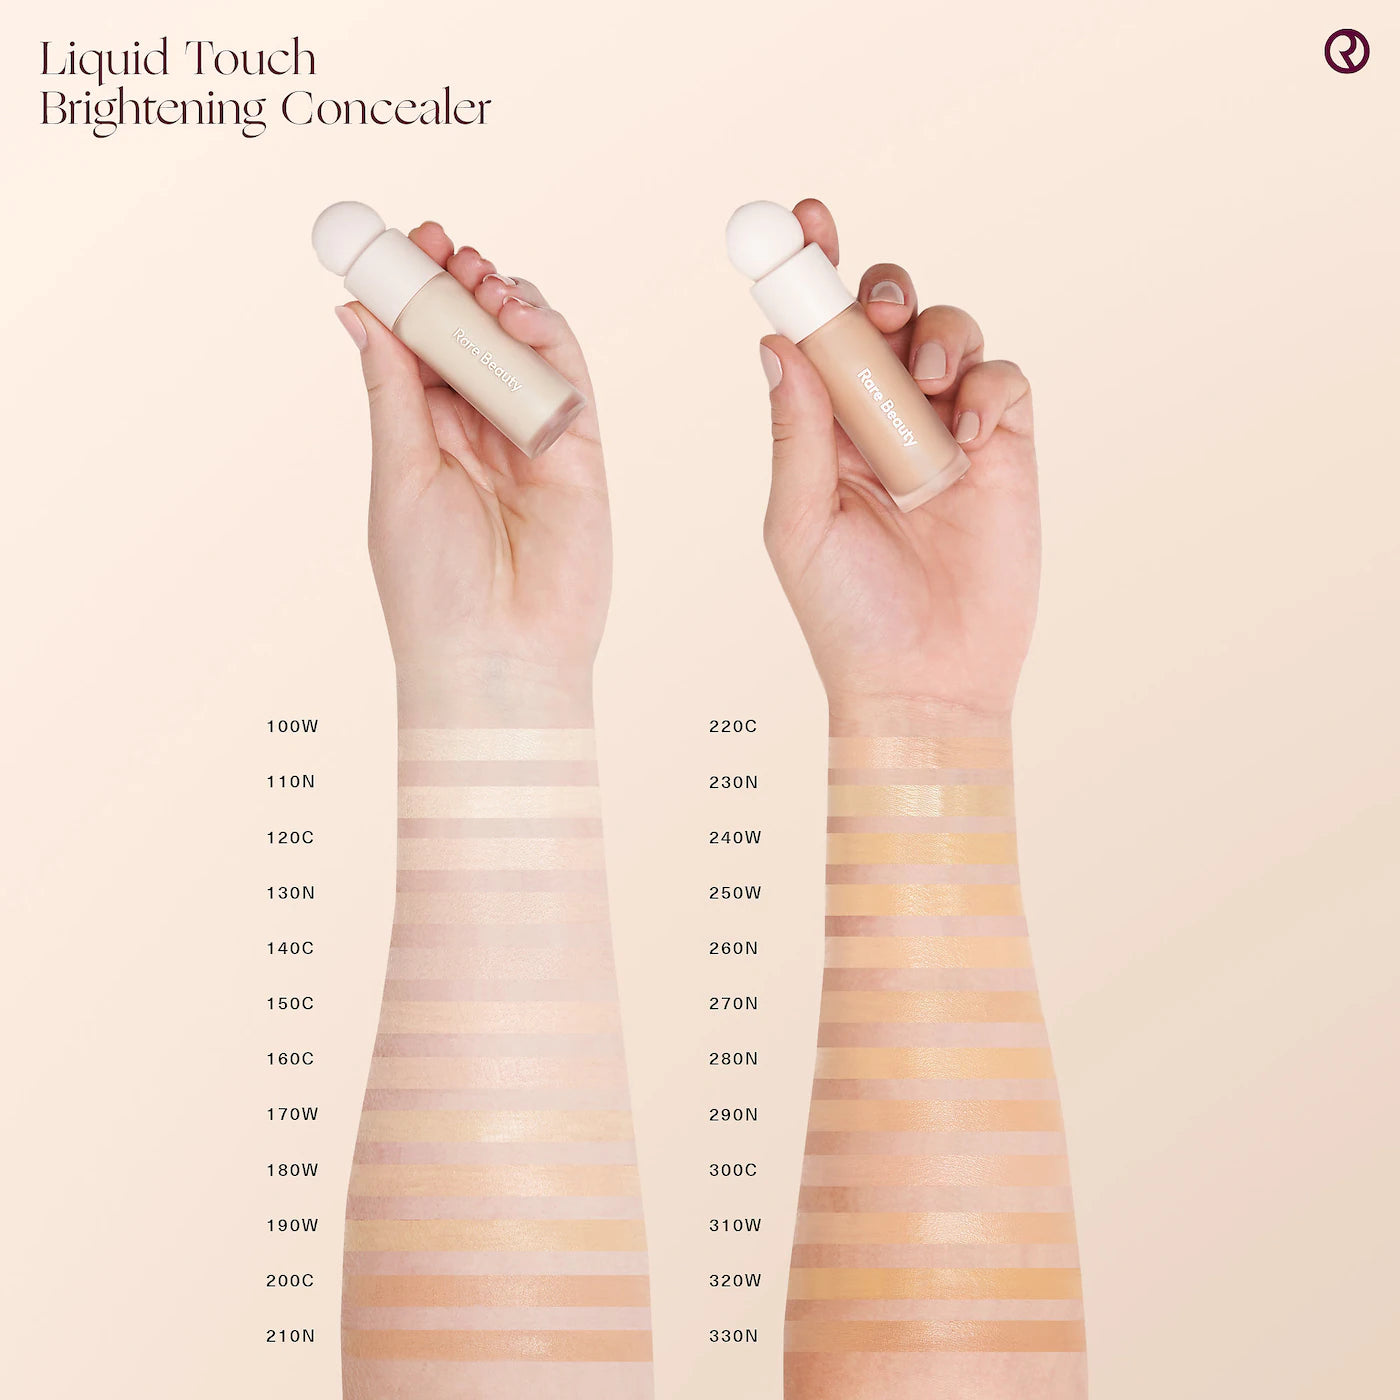 Rare Beauty Liquid Touch Brightening Concealer | 210N